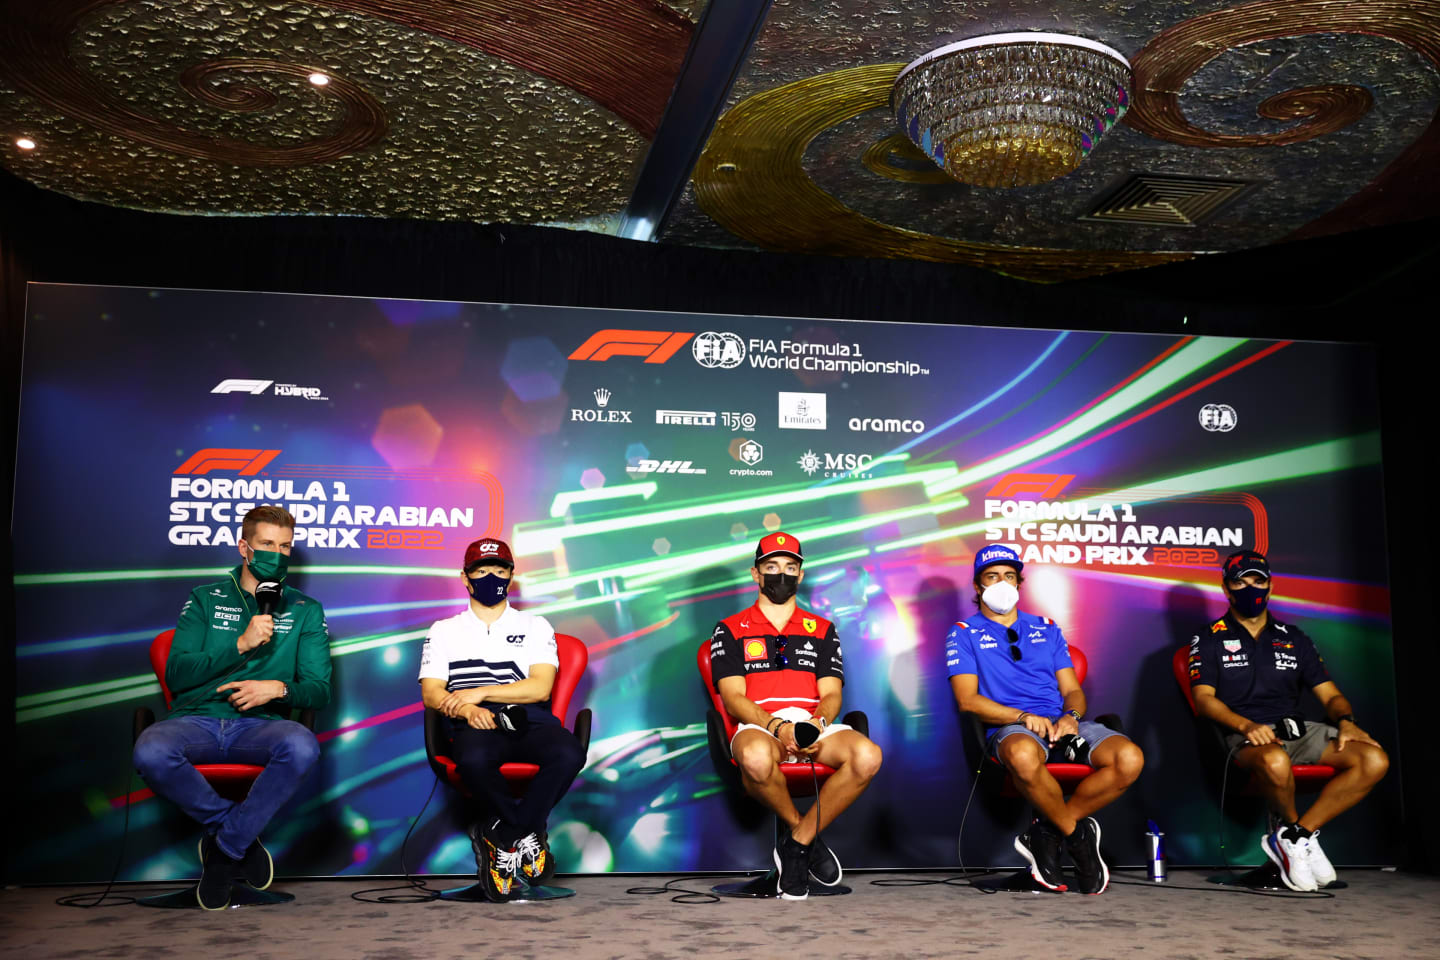 JEDDAH, SAUDI ARABIA - MARCH 25: (L-R) Nico Hulkenberg of Germany and Aston Martin F1 Team, Yuki Tsunoda of Japan and Scuderia AlphaTauri, Charles Leclerc of Monaco and Ferrari, Fernando Alonso of Spain and Alpine F1 and Sergio Perez of Mexico and Oracle Red Bull Racing attend the Drivers Press Conference before practice ahead of the F1 Grand Prix of Saudi Arabia at the Jeddah Corniche Circuit on March 25, 2022 in Jeddah, Saudi Arabia. (Photo by Dan Istitene - Formula 1/Formula 1 via Getty Images)